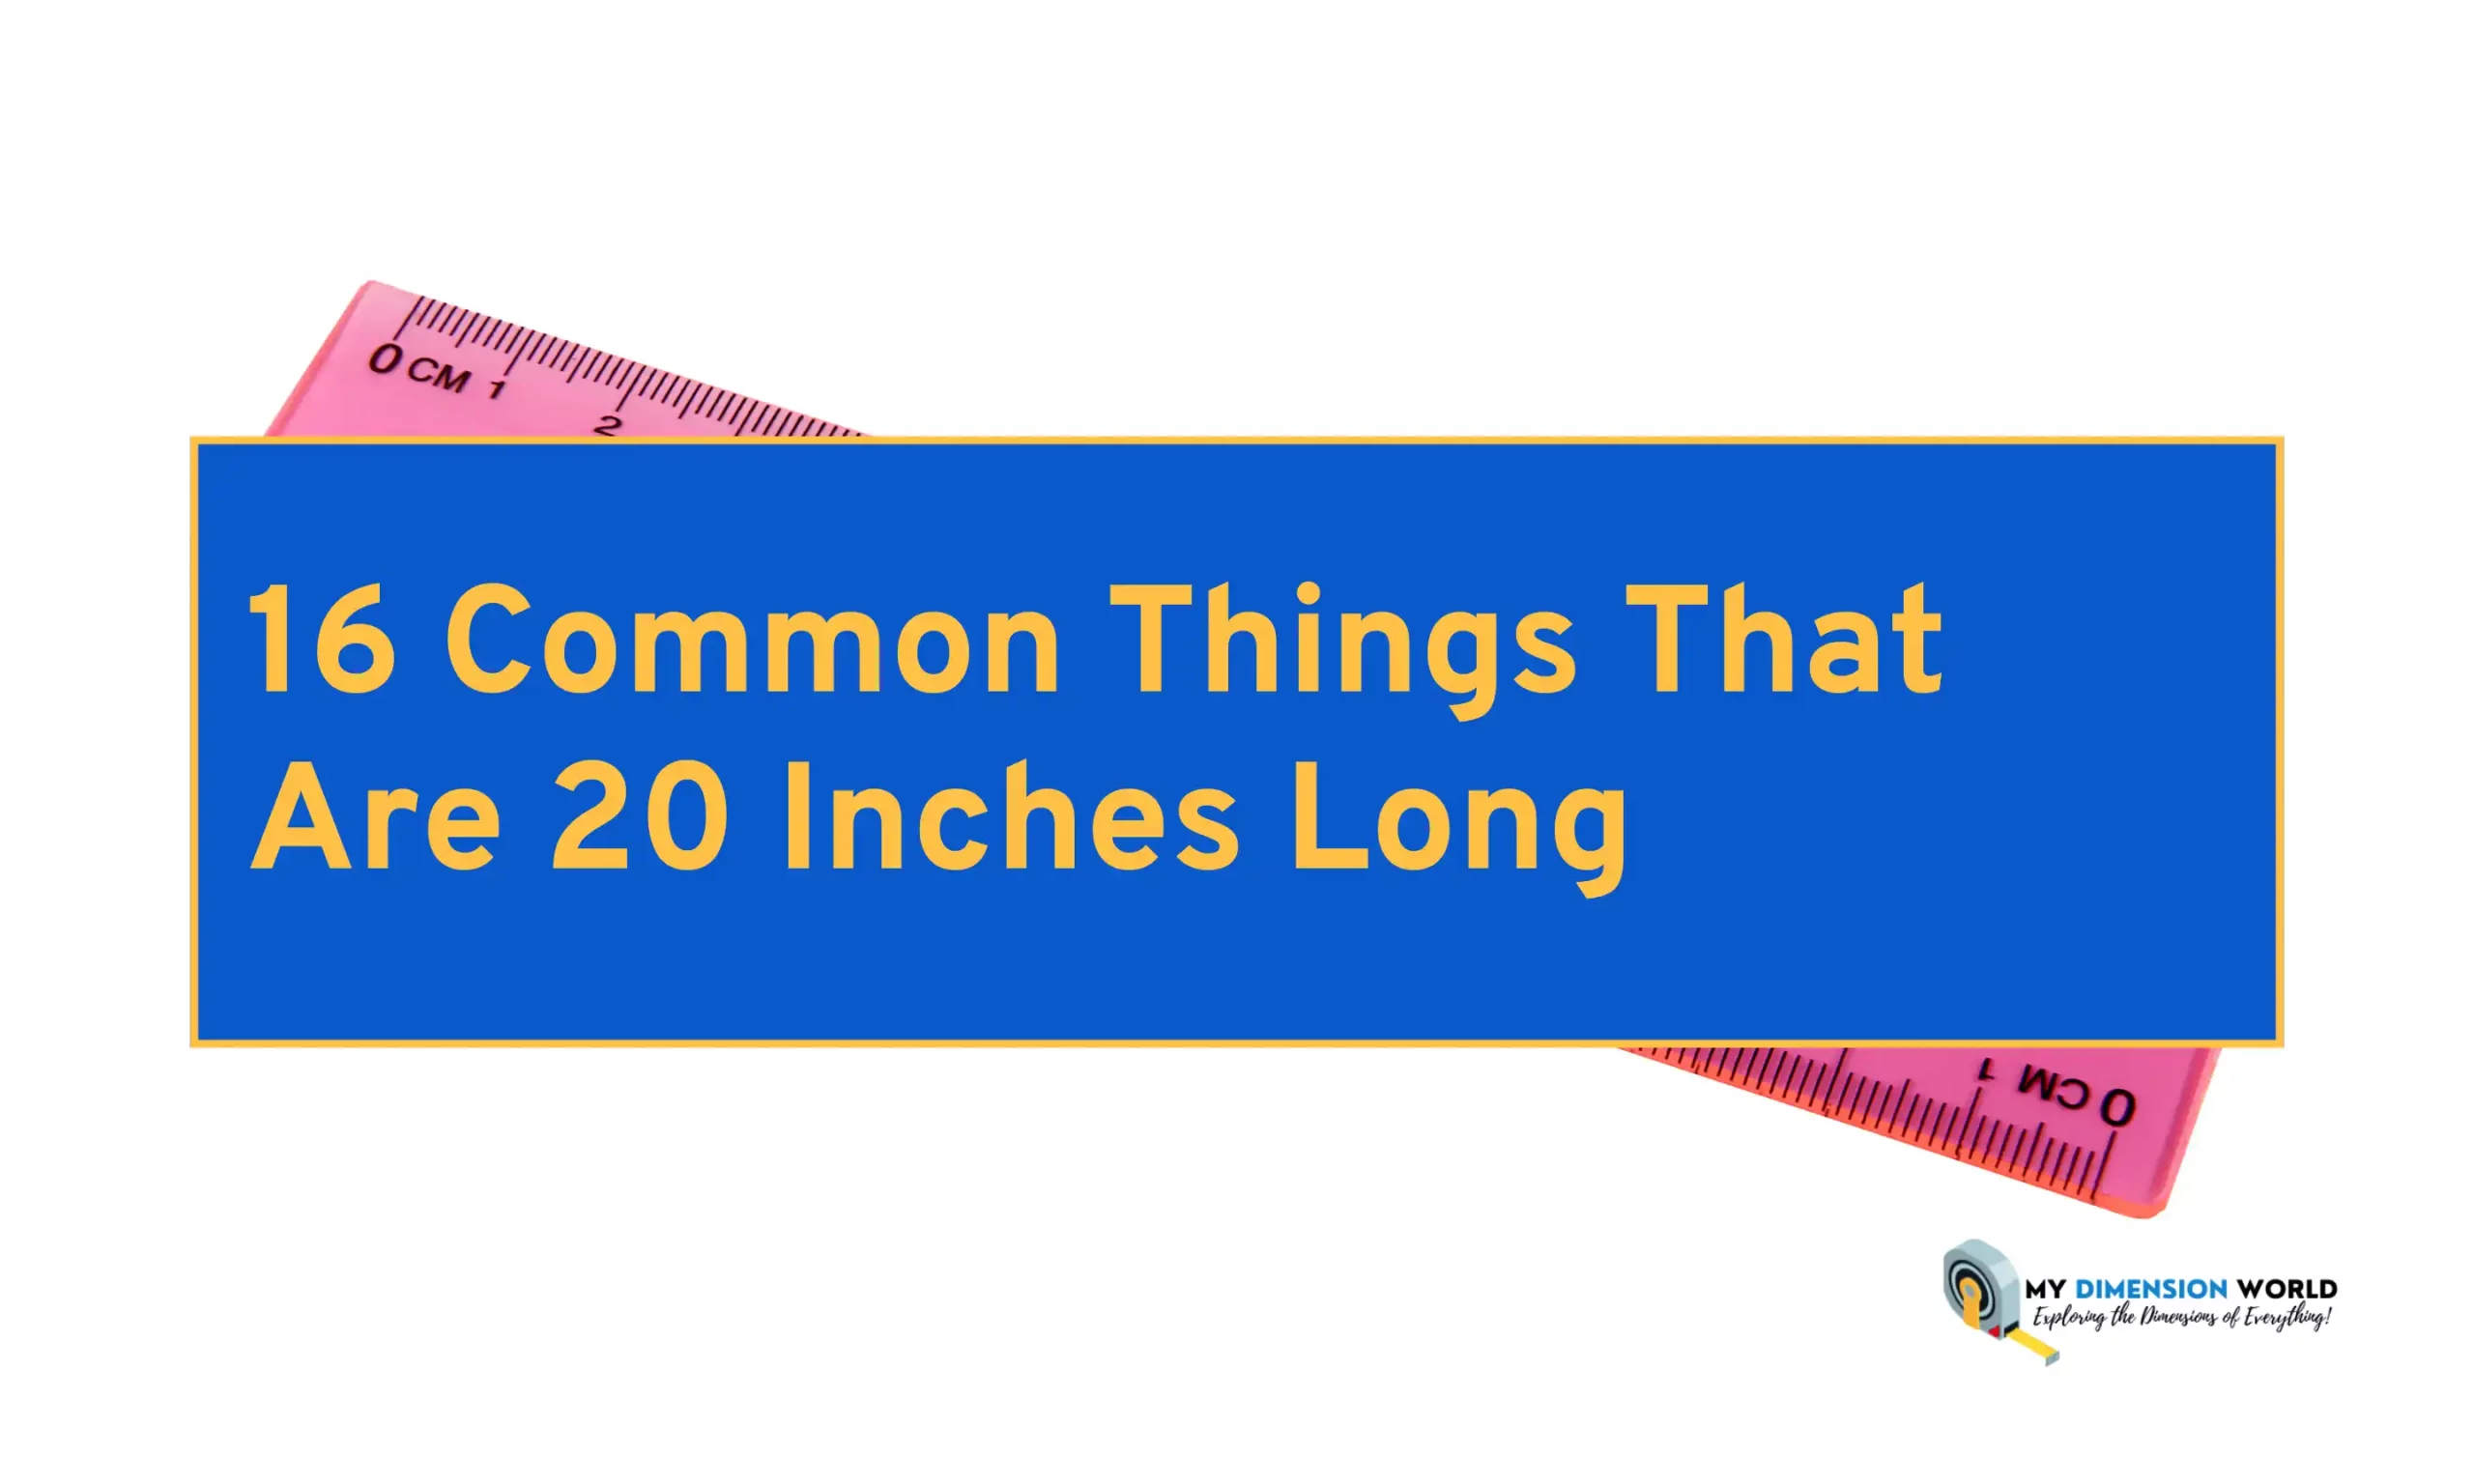 16 Common Things That Are 20 Inches Long